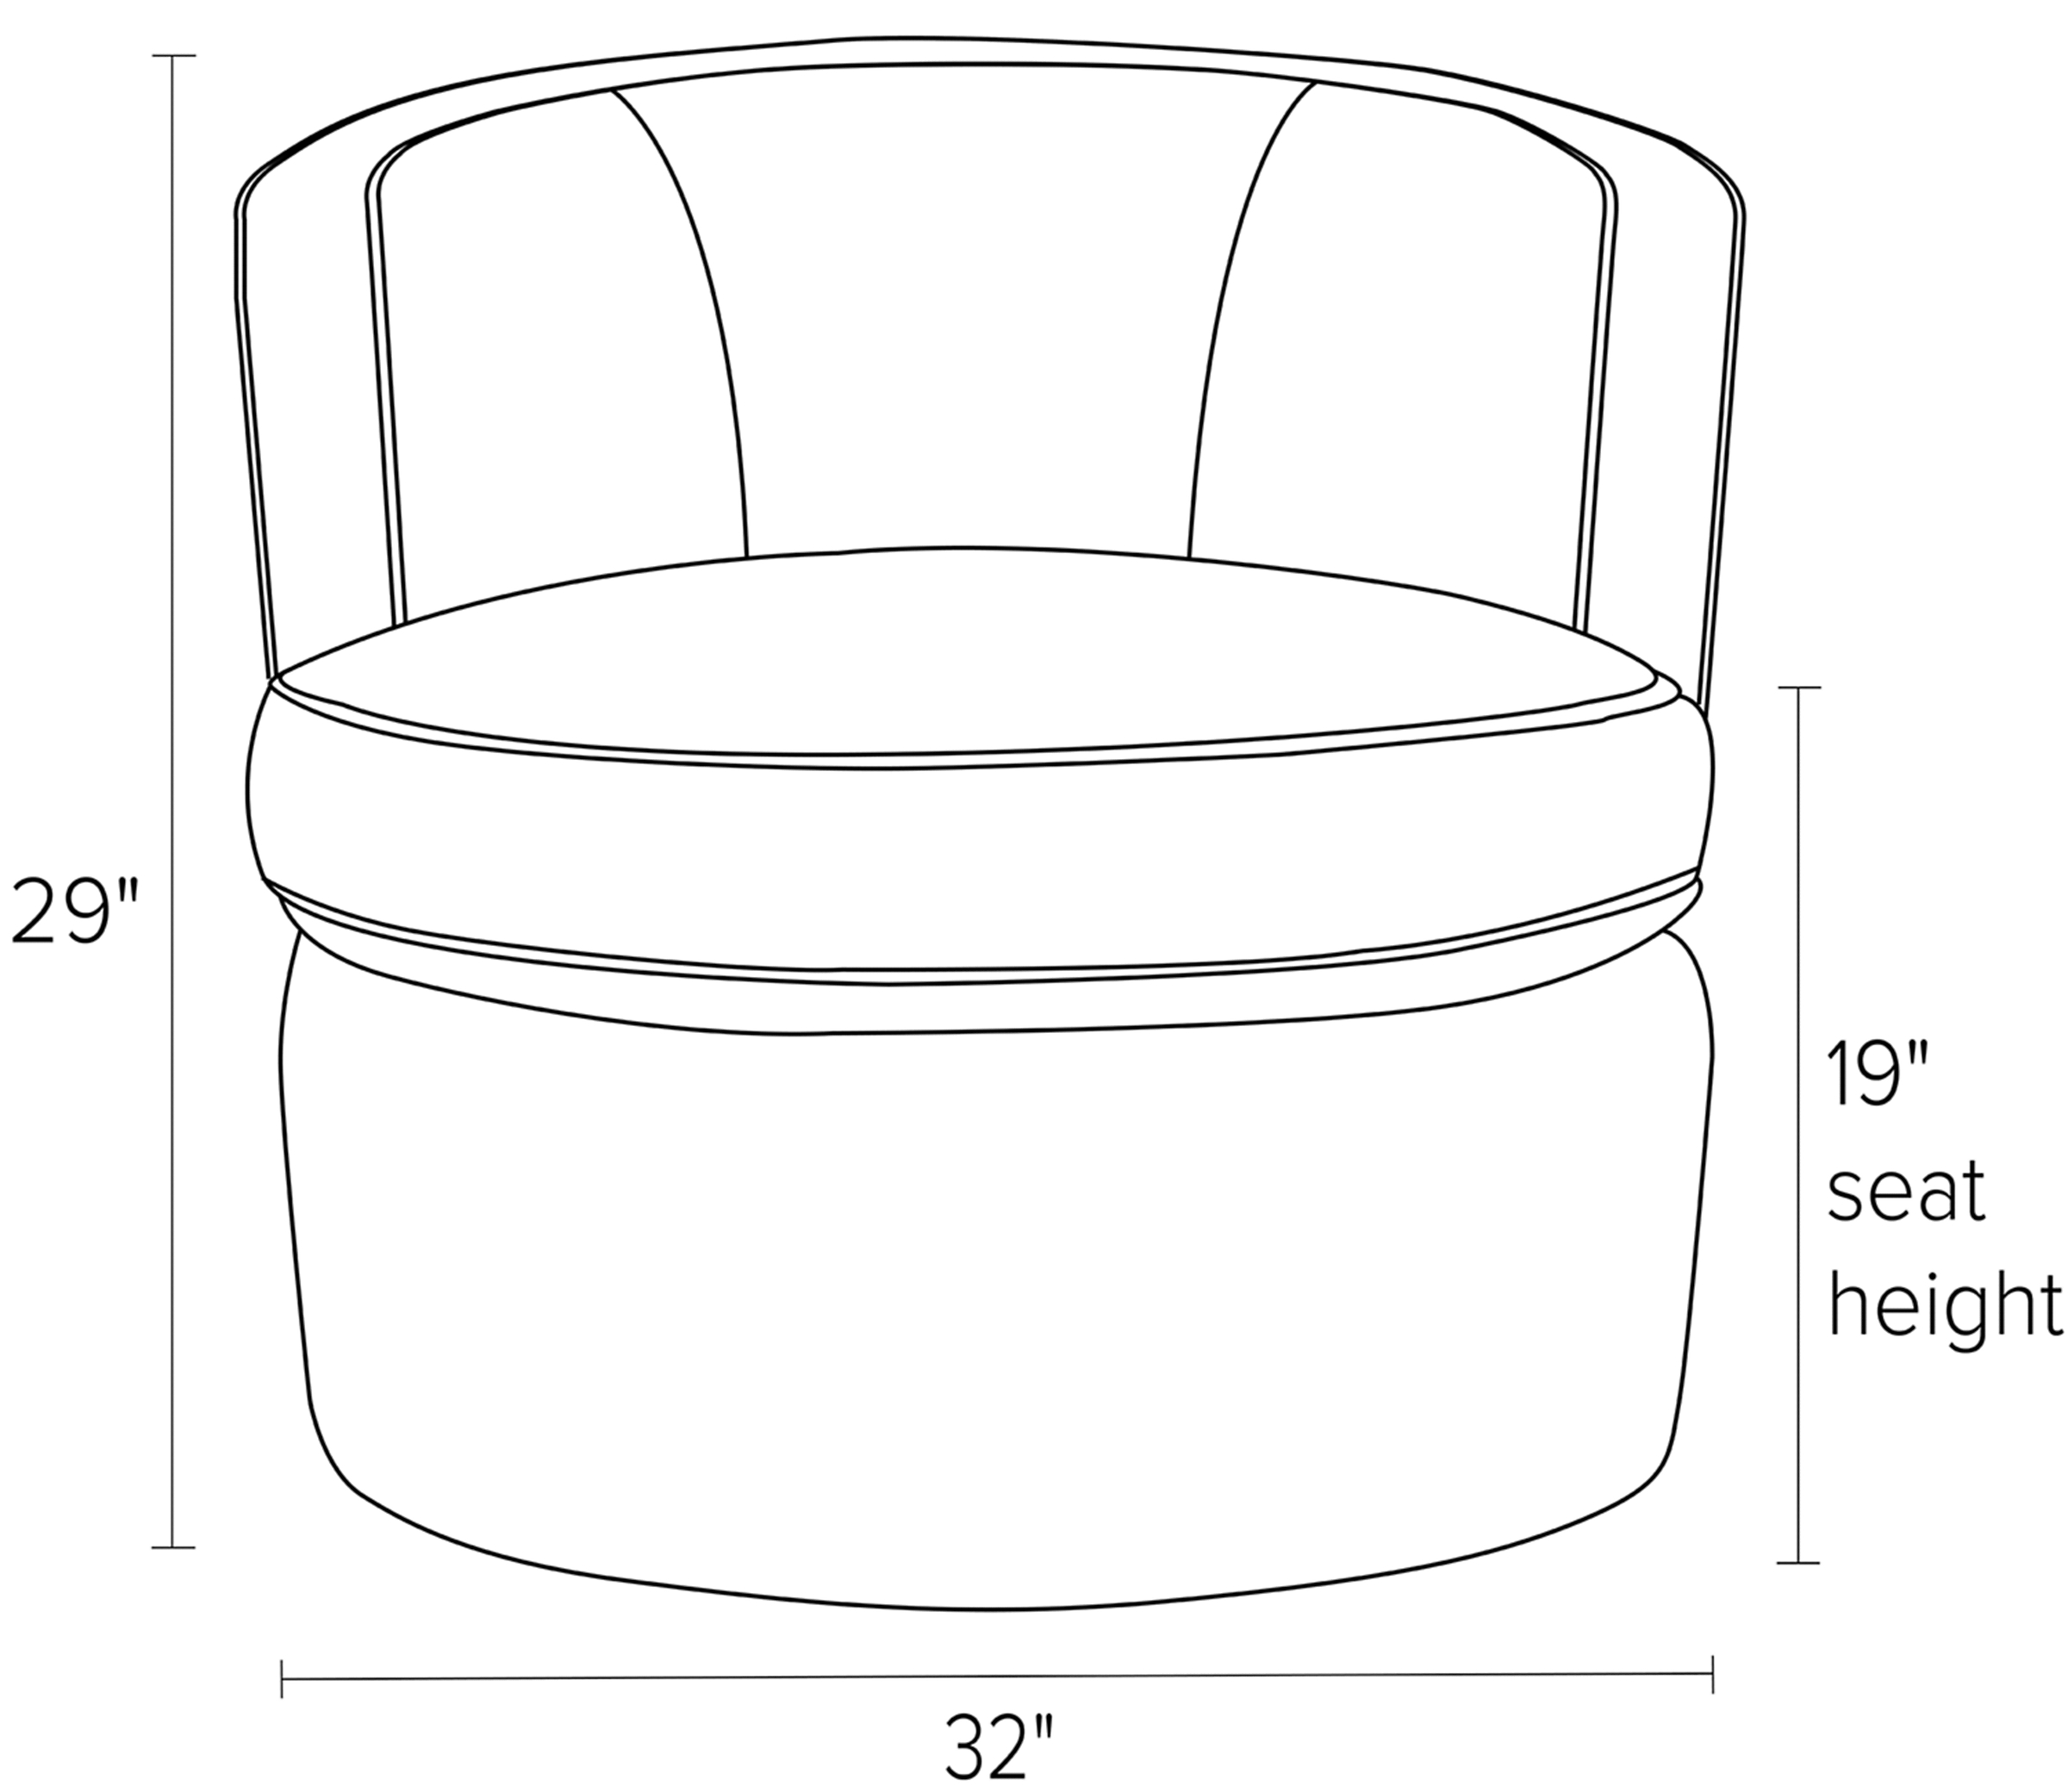 Front view dimension illustration of Otis swivel chair.